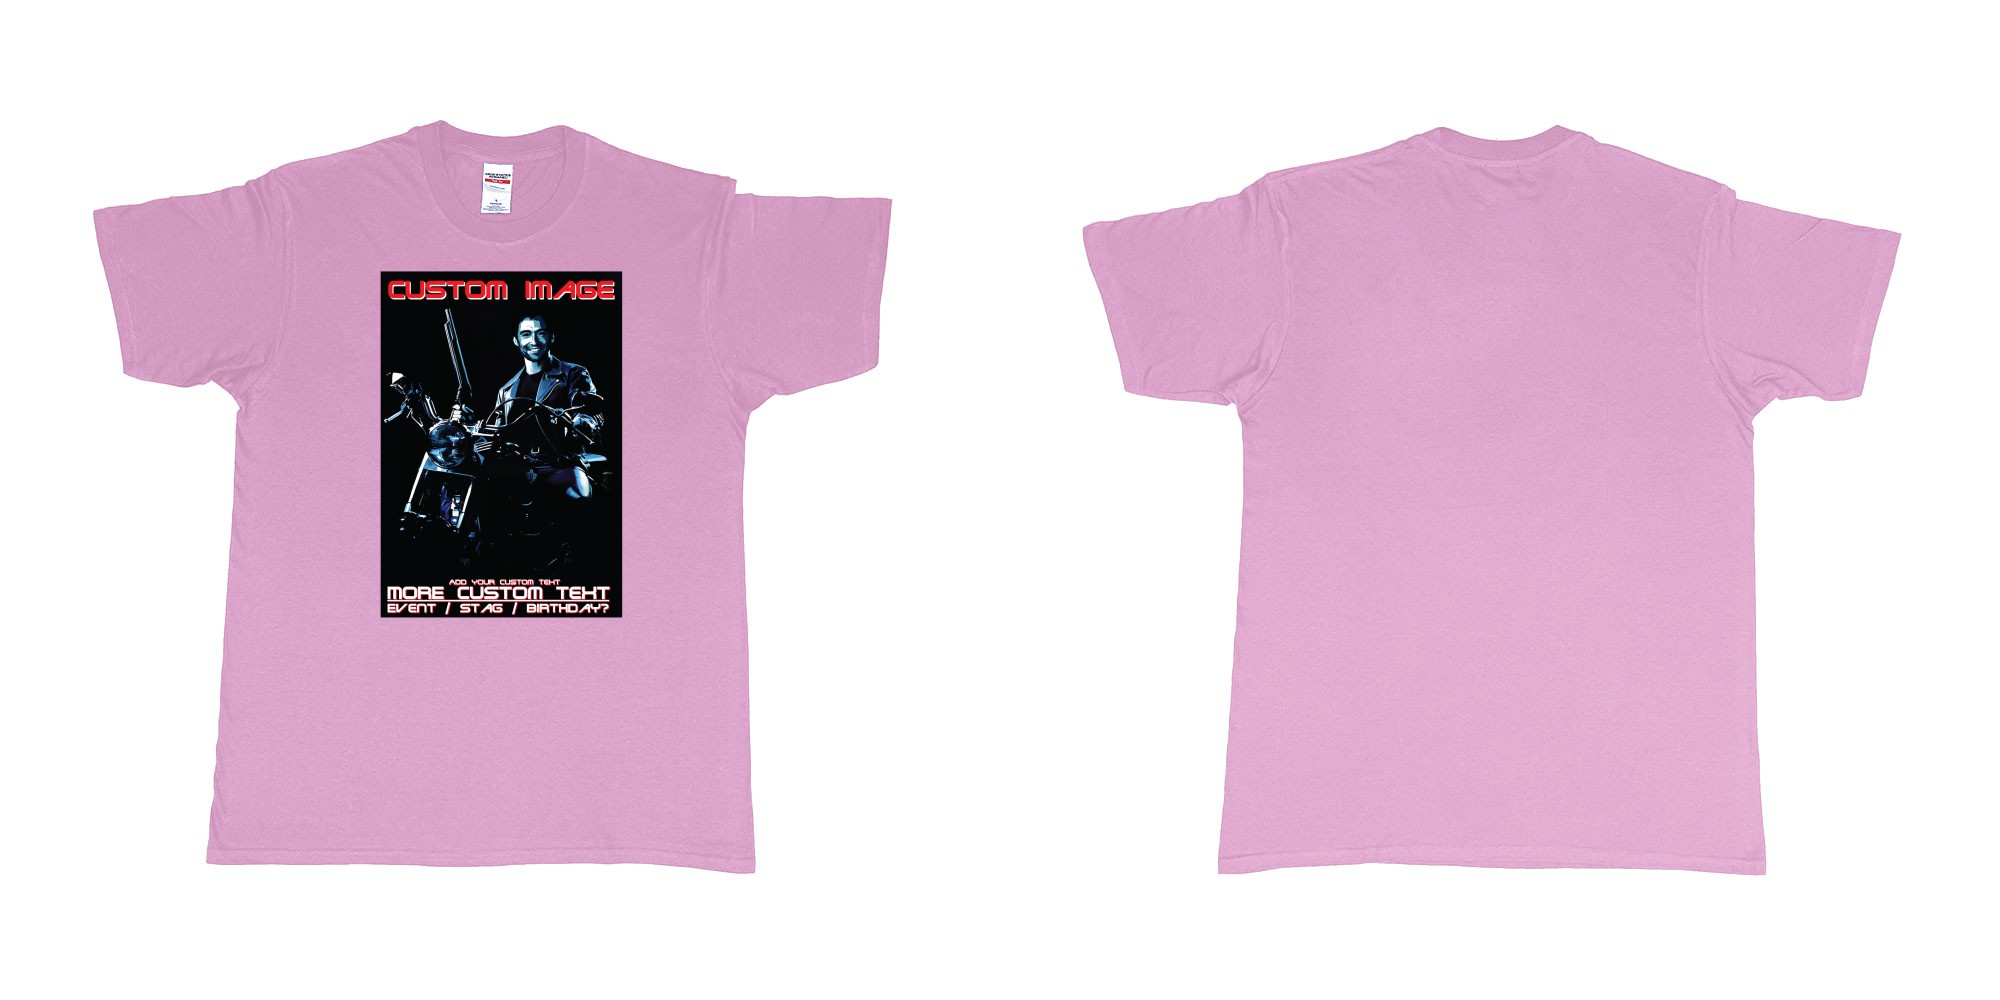 Custom tshirt design terminator 2 judgement day hugh jackman custom face in fabric color light-pink choice your own text made in Bali by The Pirate Way